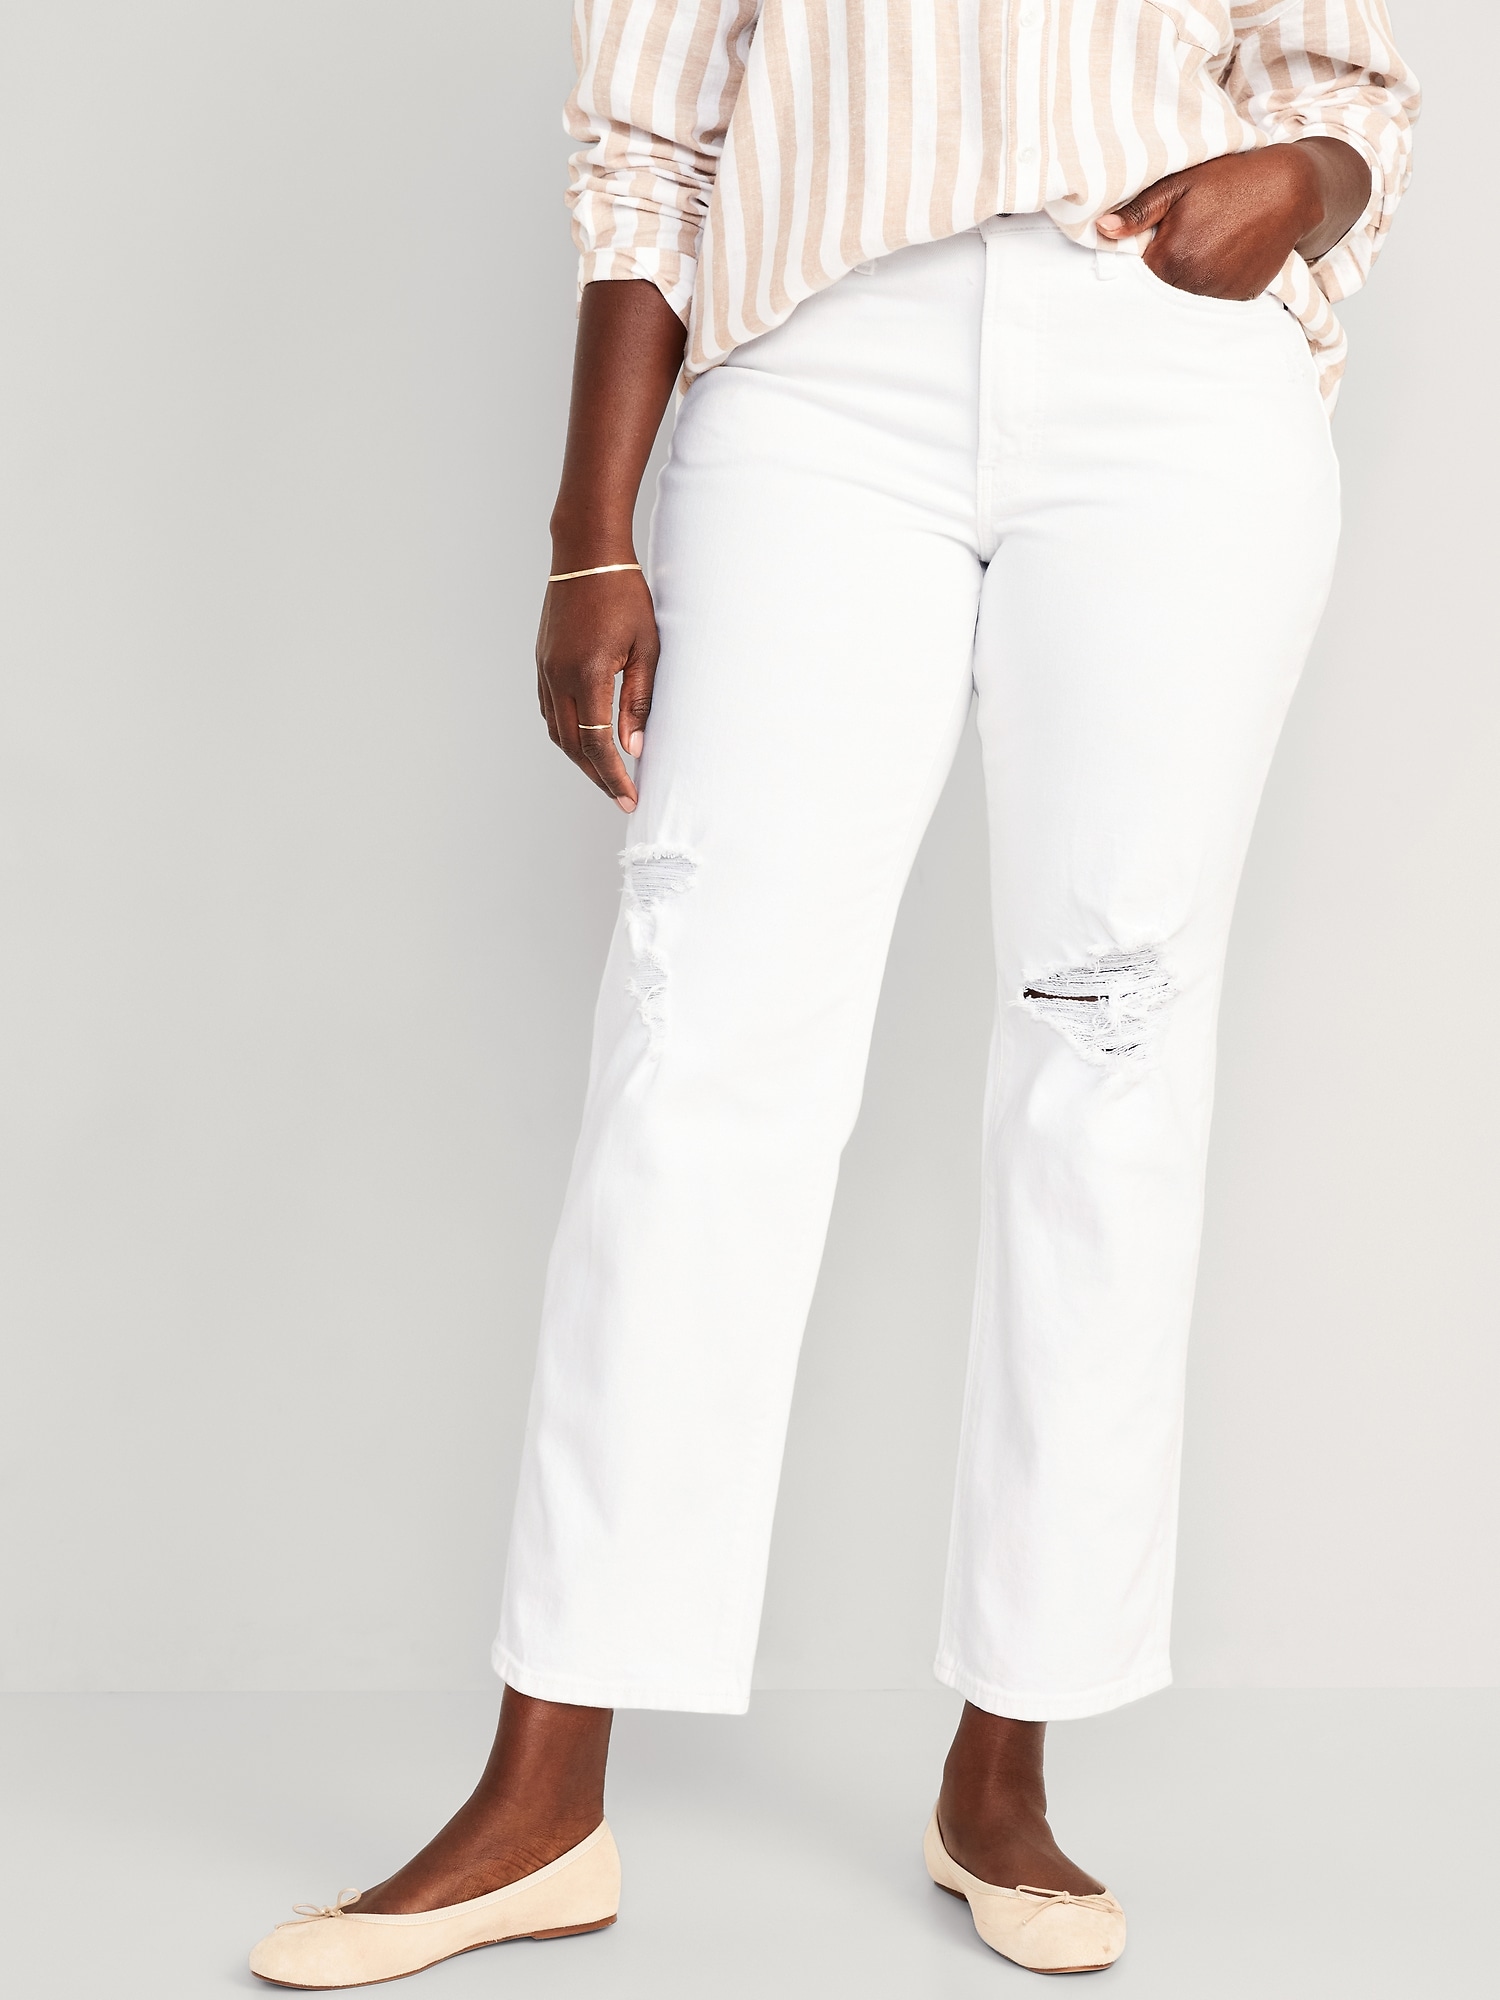 Old Navy Curvy High-Waisted OG Loose White Jeans for Women